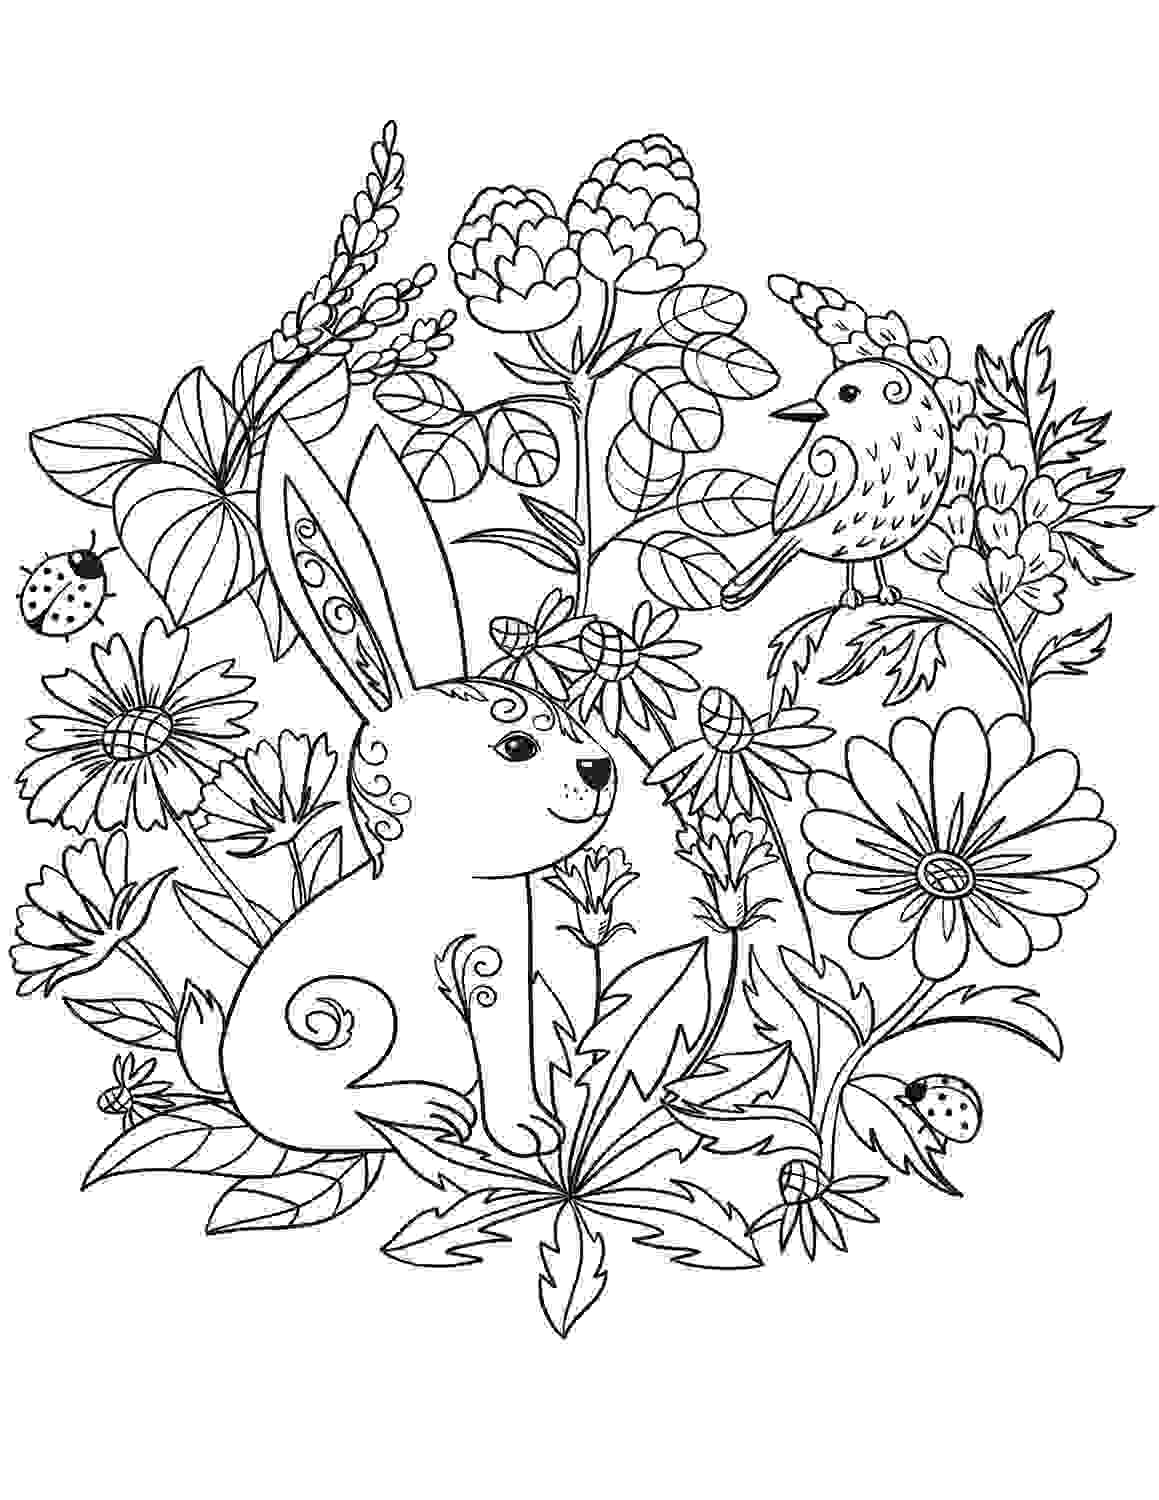 Flowers pattern on rabbit and bird Coloring Pages